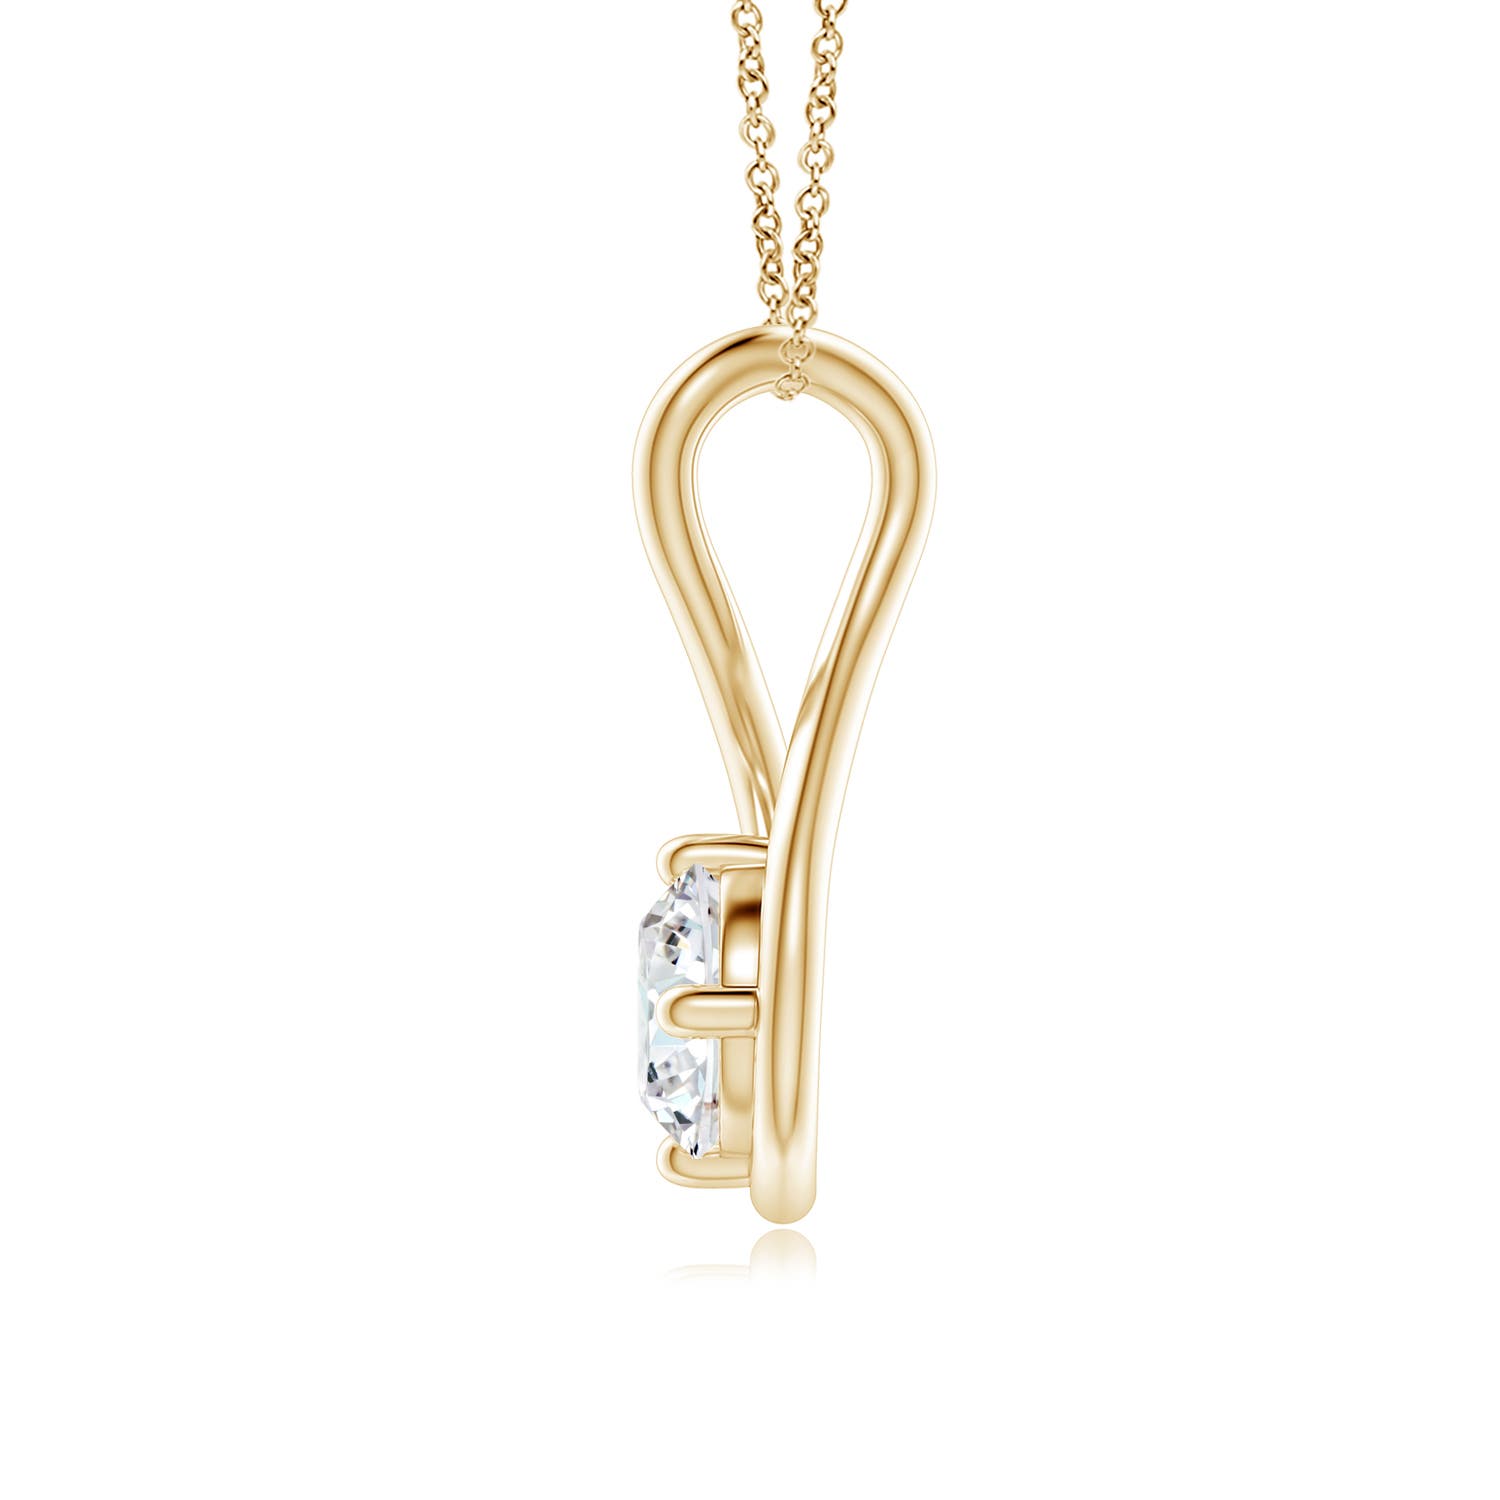 GVS2 / 0.39 CT / 14 KT Yellow Gold